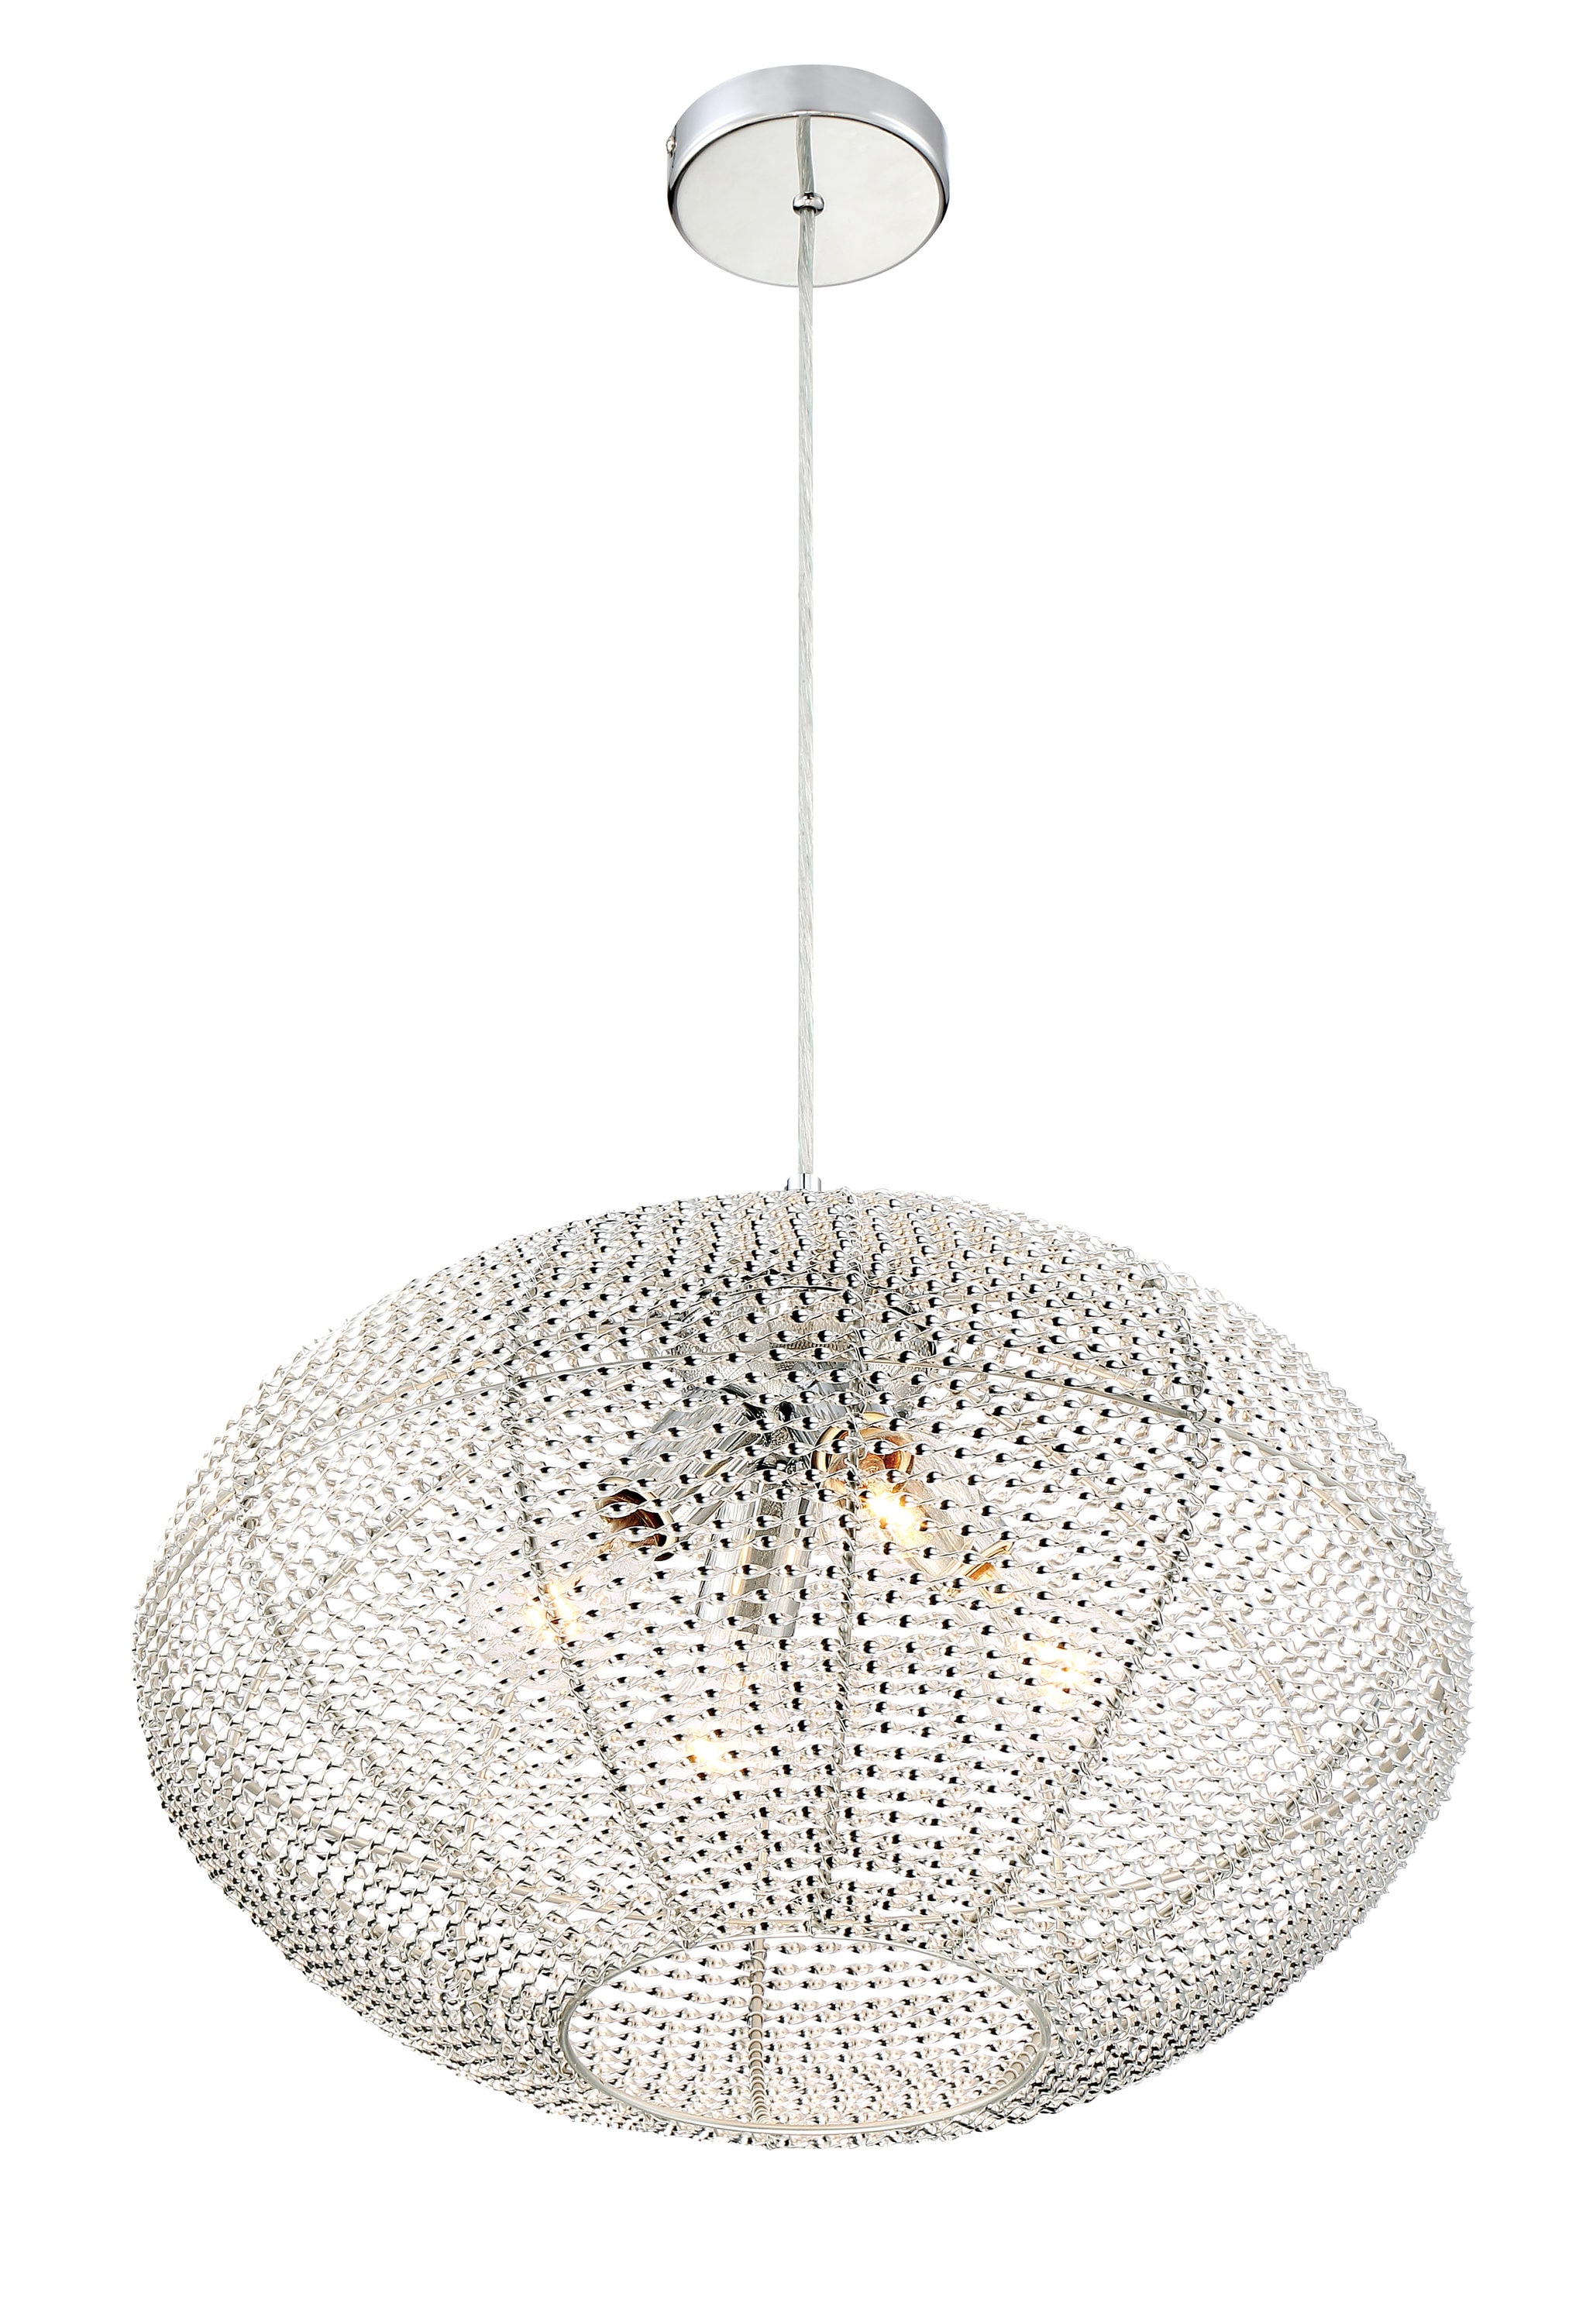 Quoizel Tango 4-Light Pendant Polished Lighting Hanging Pendant department in Chrome Dome Transitional Light the at